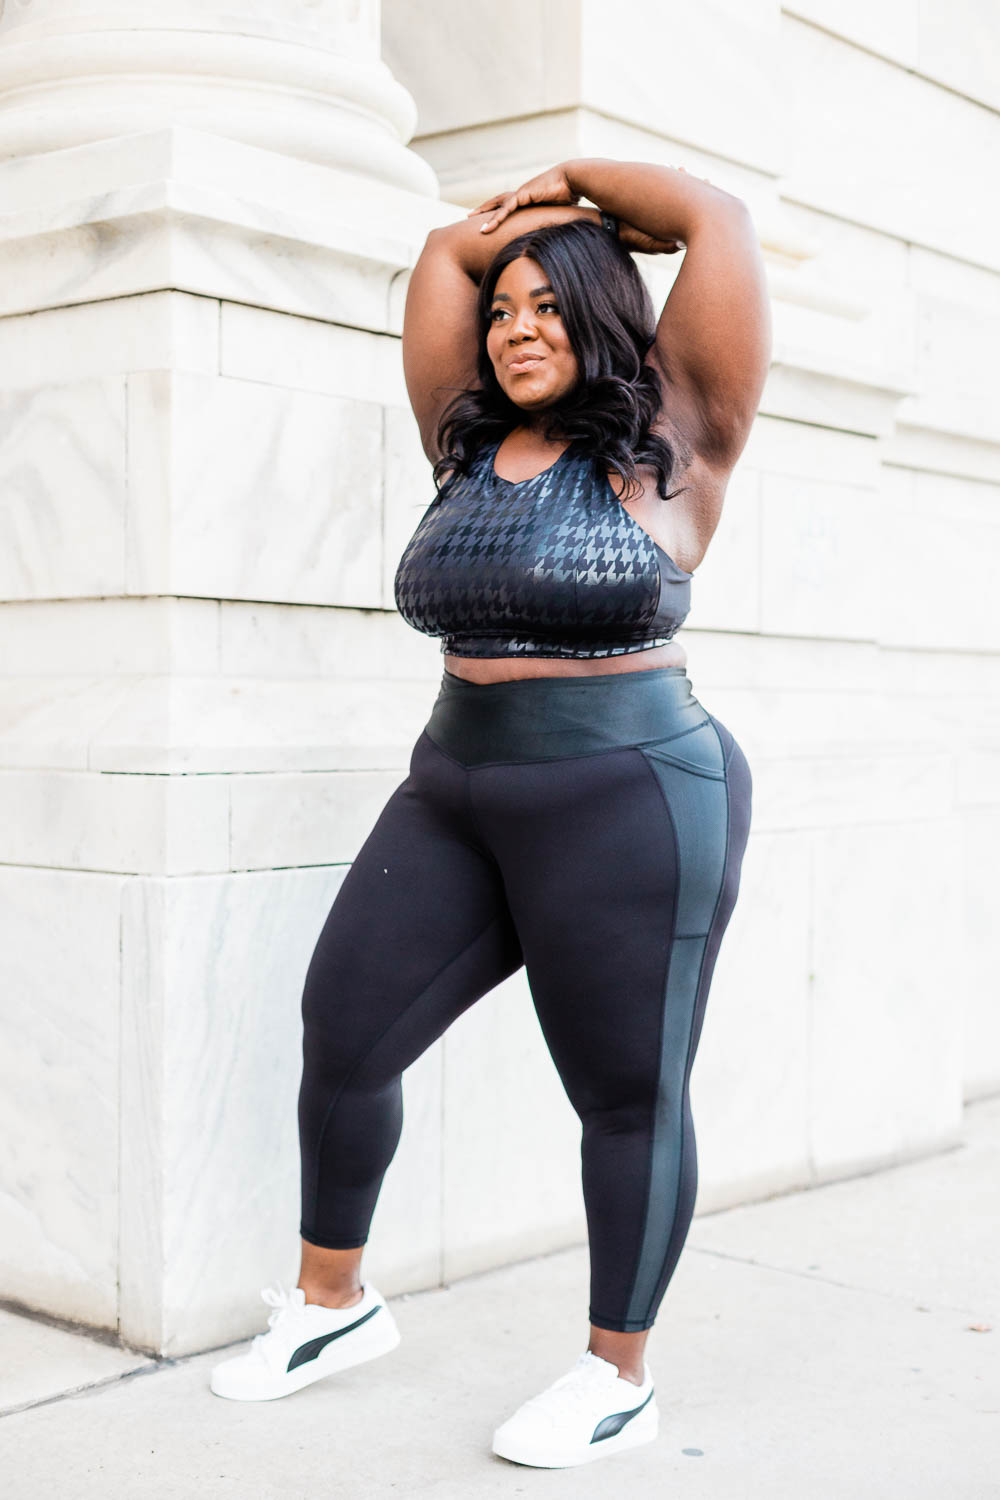 JCPenney, Xersion, Plus Size Athleticwear, Plus Size Fitness, Fitness